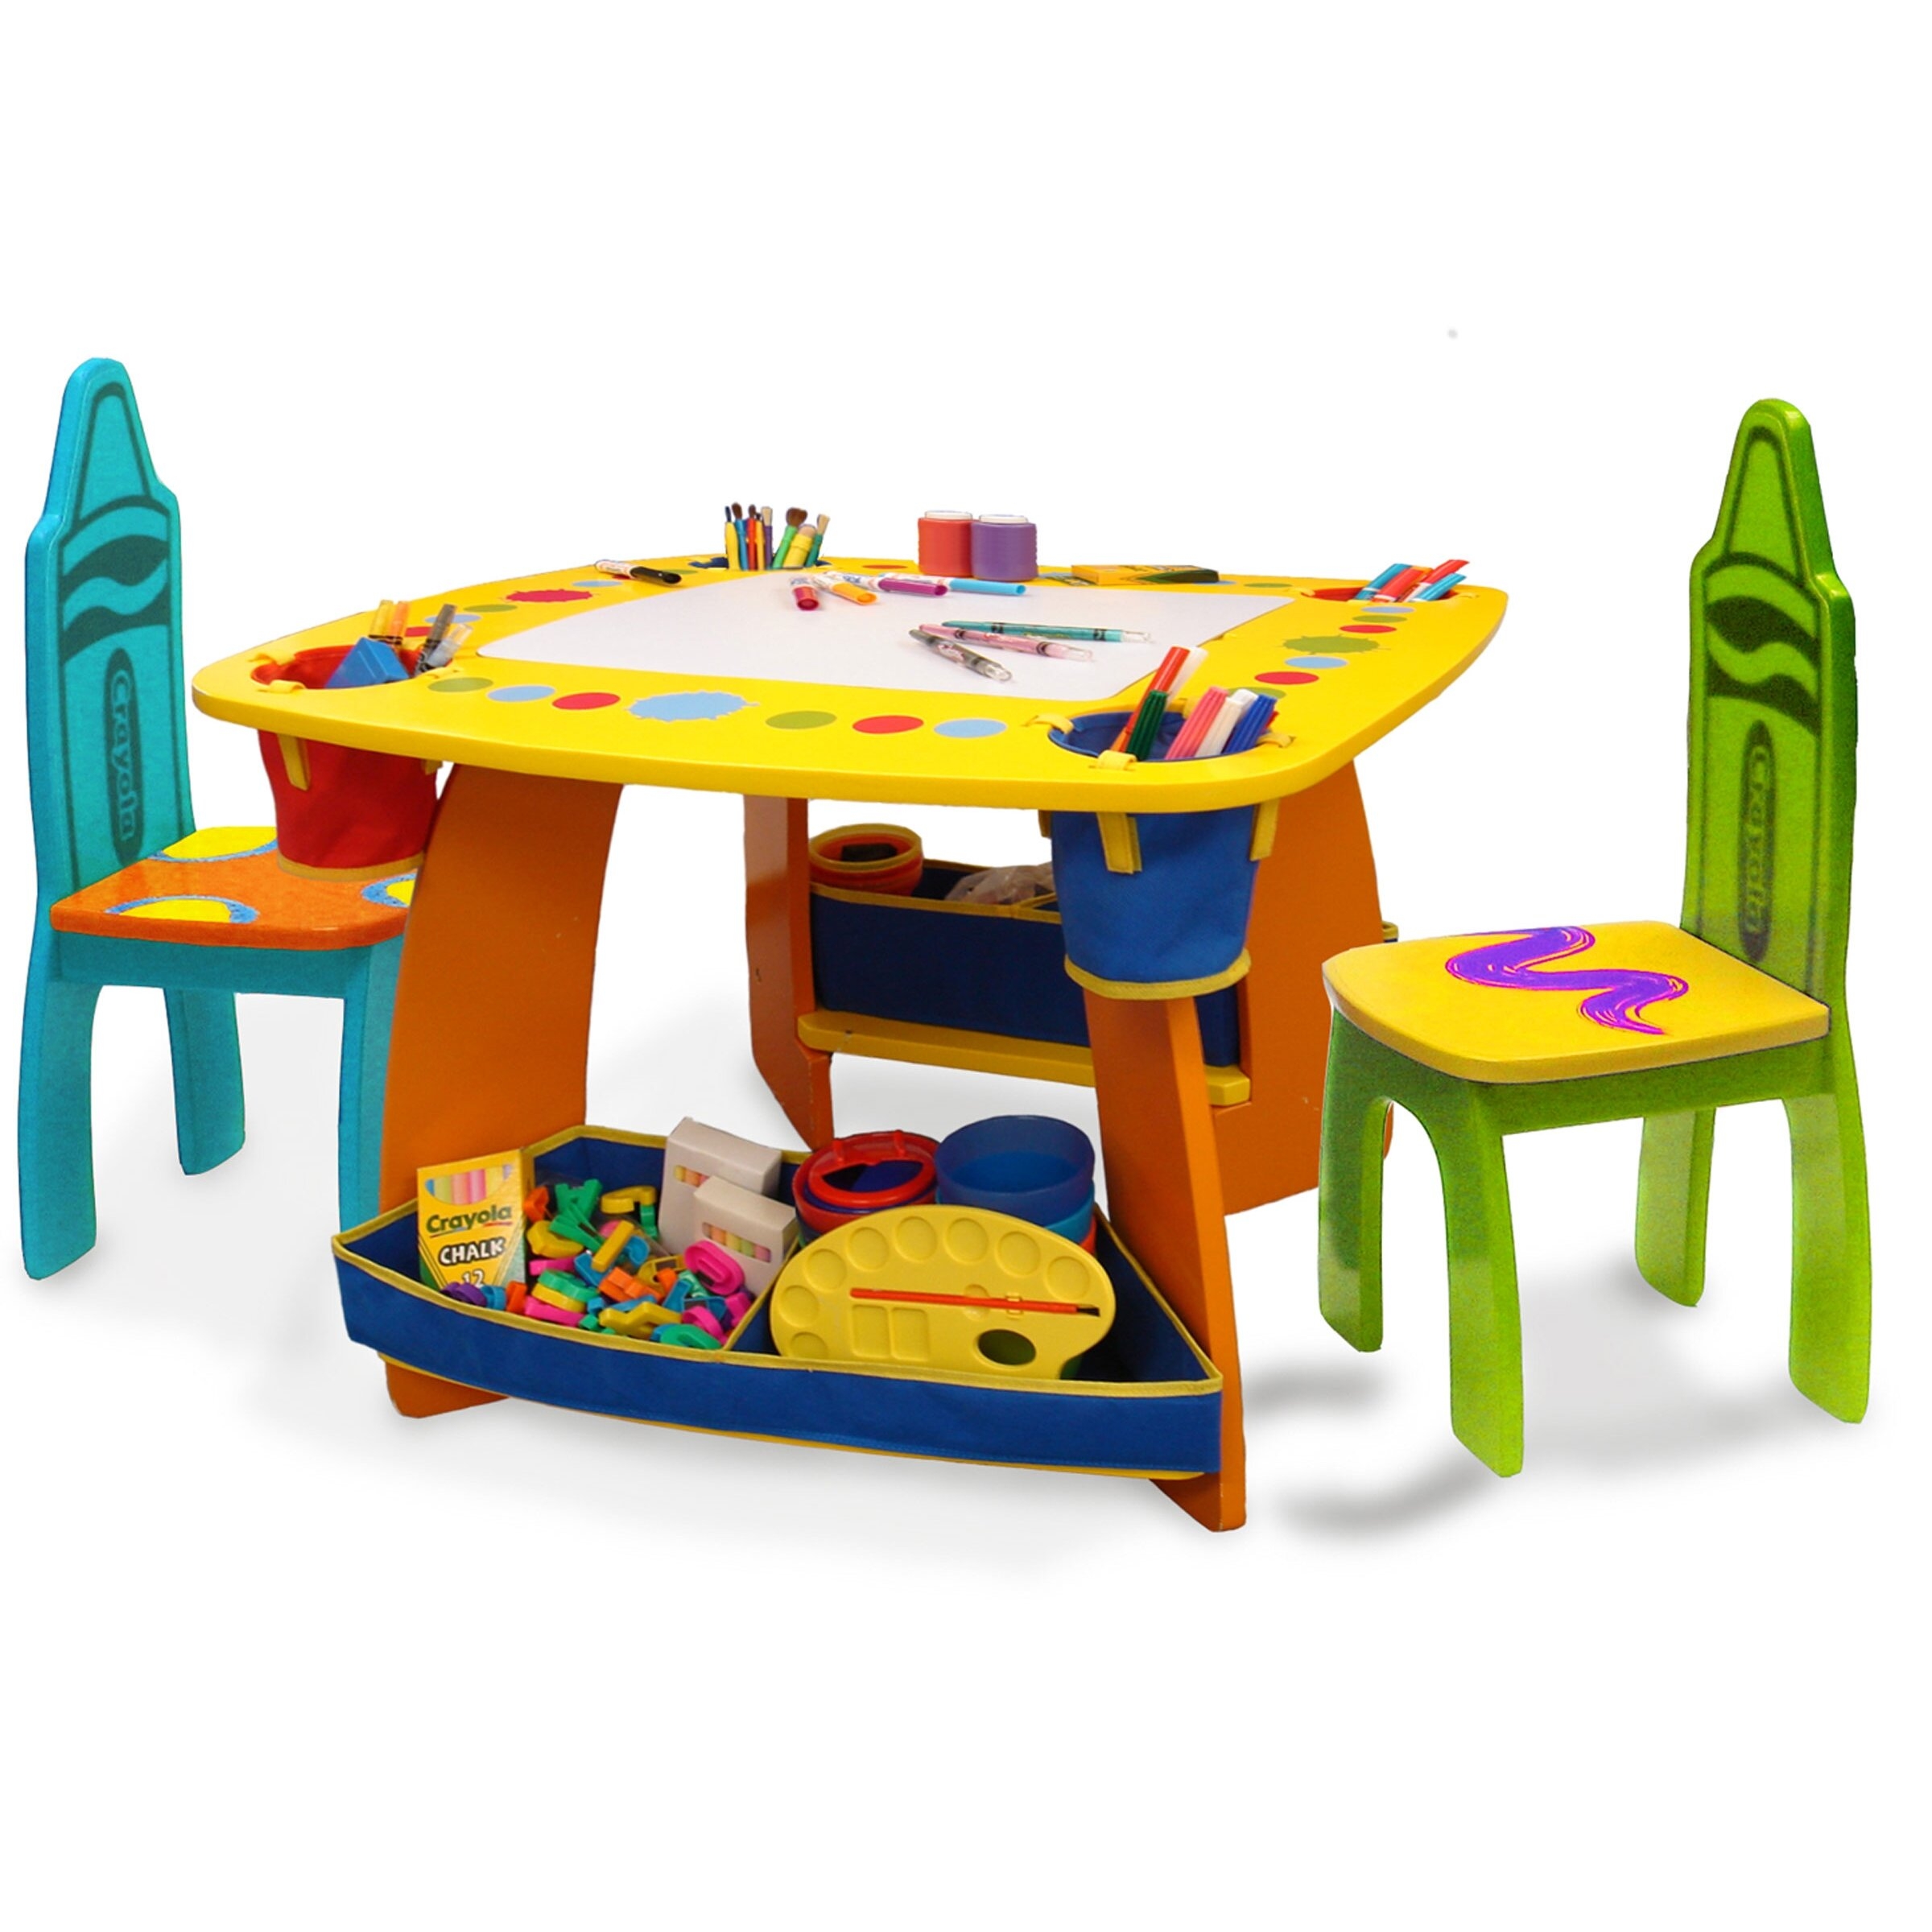 Crayola wooden table and chairs set